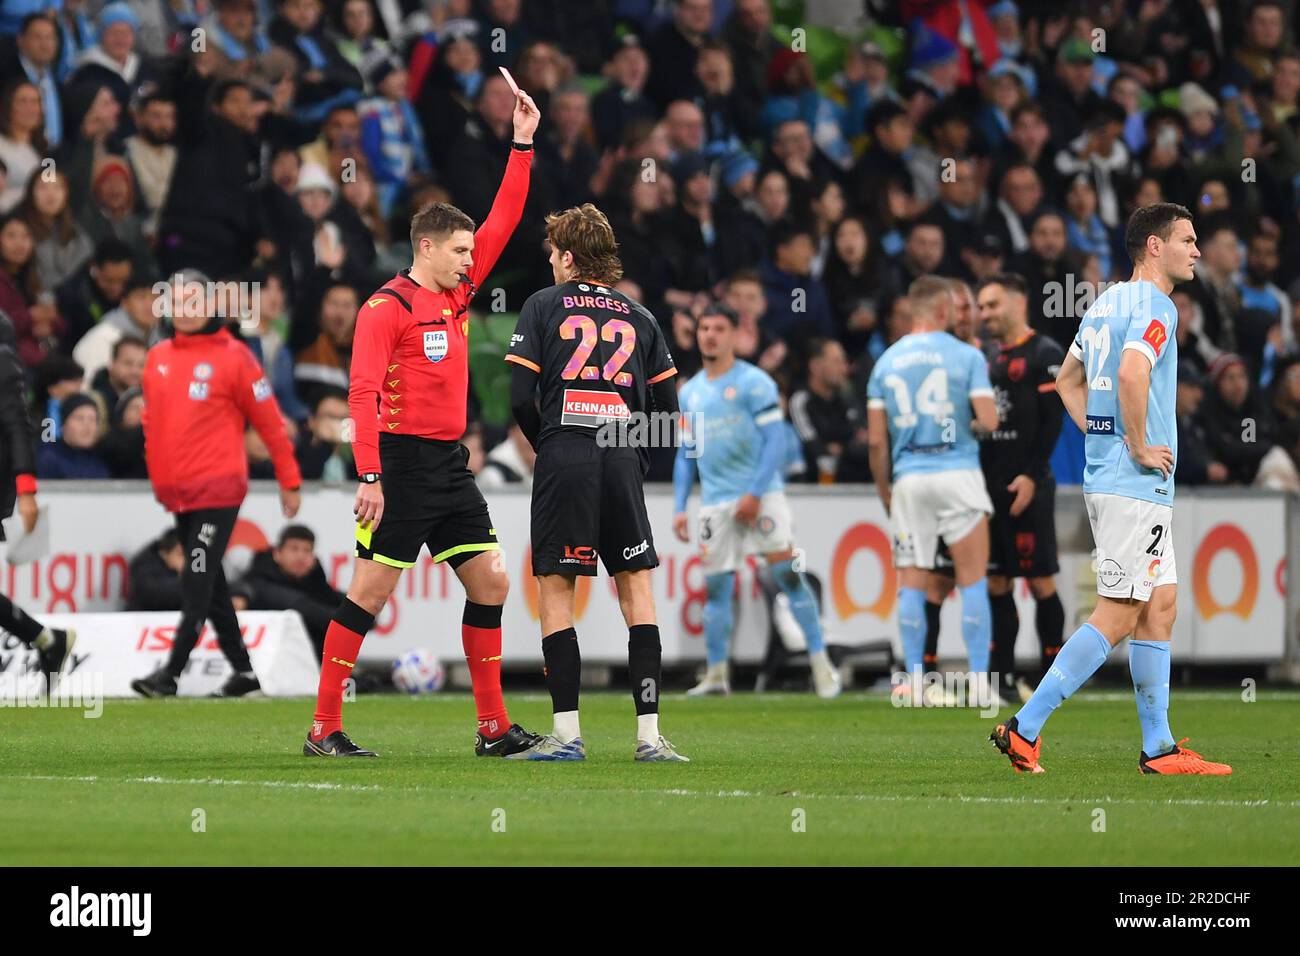 Melbourne, Australia. 19 May 2023, Isuzu UTE A-League Finals Series, Melbourne City v Sydney FC. Pictured: The referee shows the red card to Sydney FC midfielder Max Burgess following a review of a foul on City’s Marco Tilio at Melbourne’s AAMI Park. Credit: Karl Phillipson/Alamy Live News Stock Photo